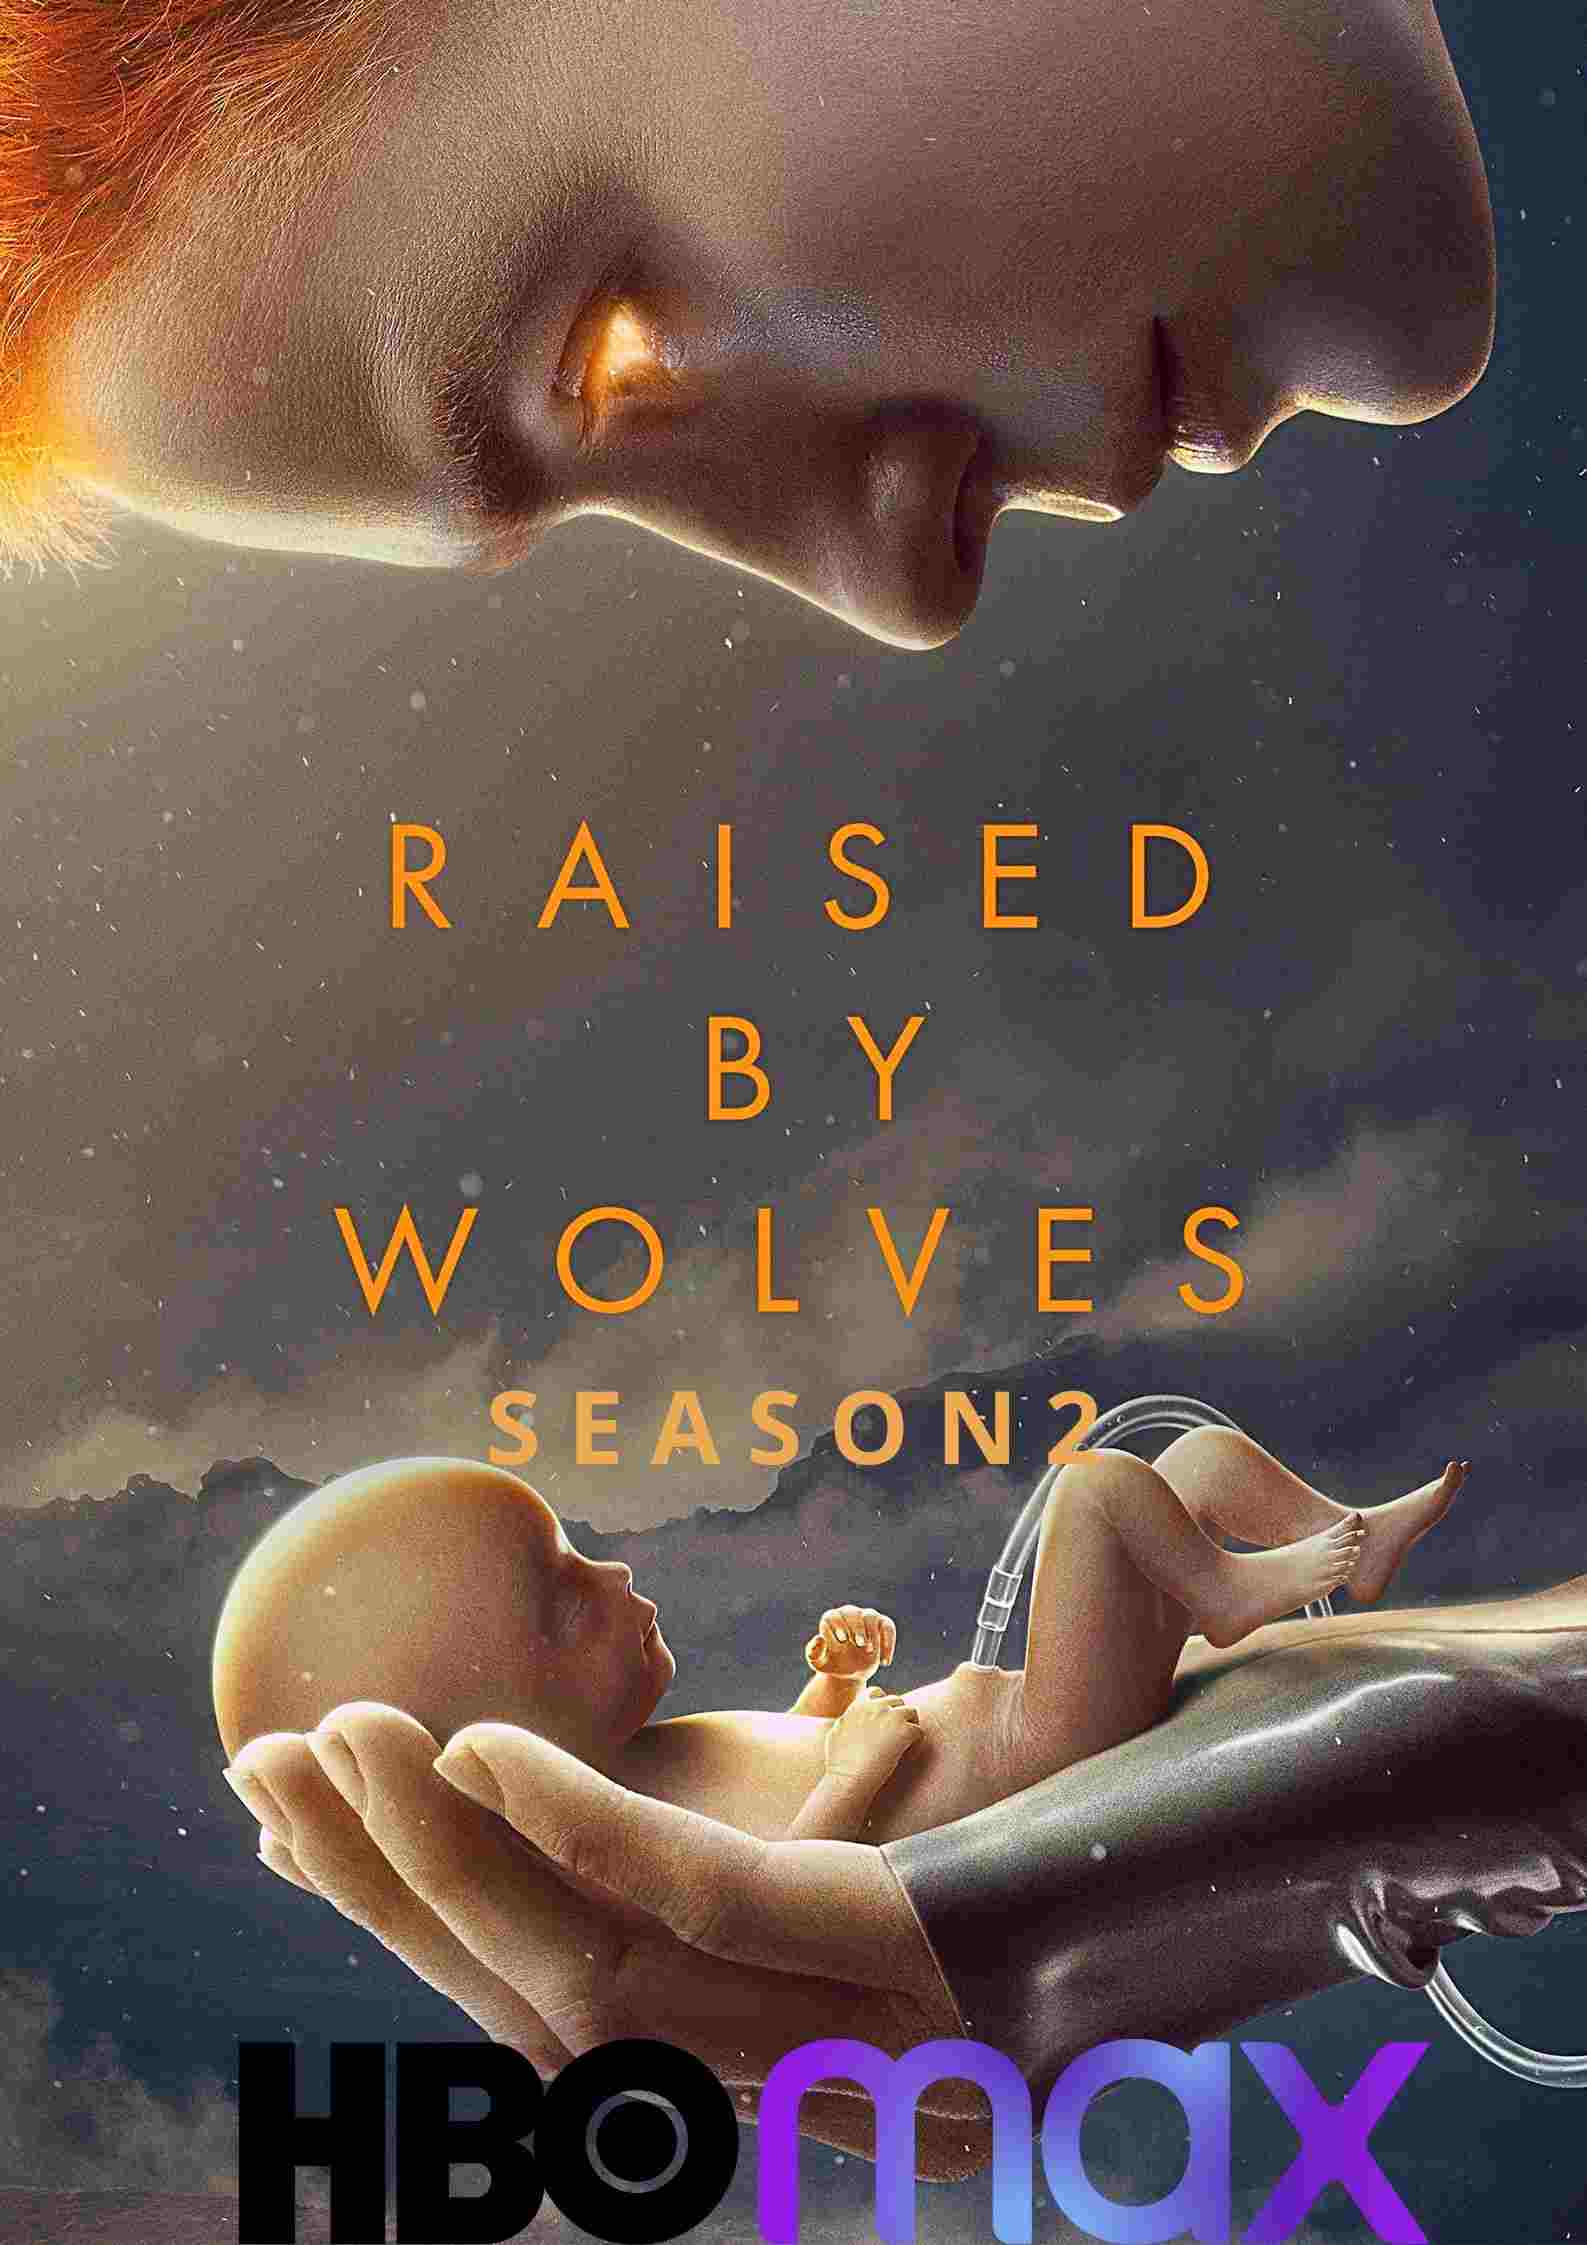 Raised by Wolves Parents Guide and Age Rating | 2020